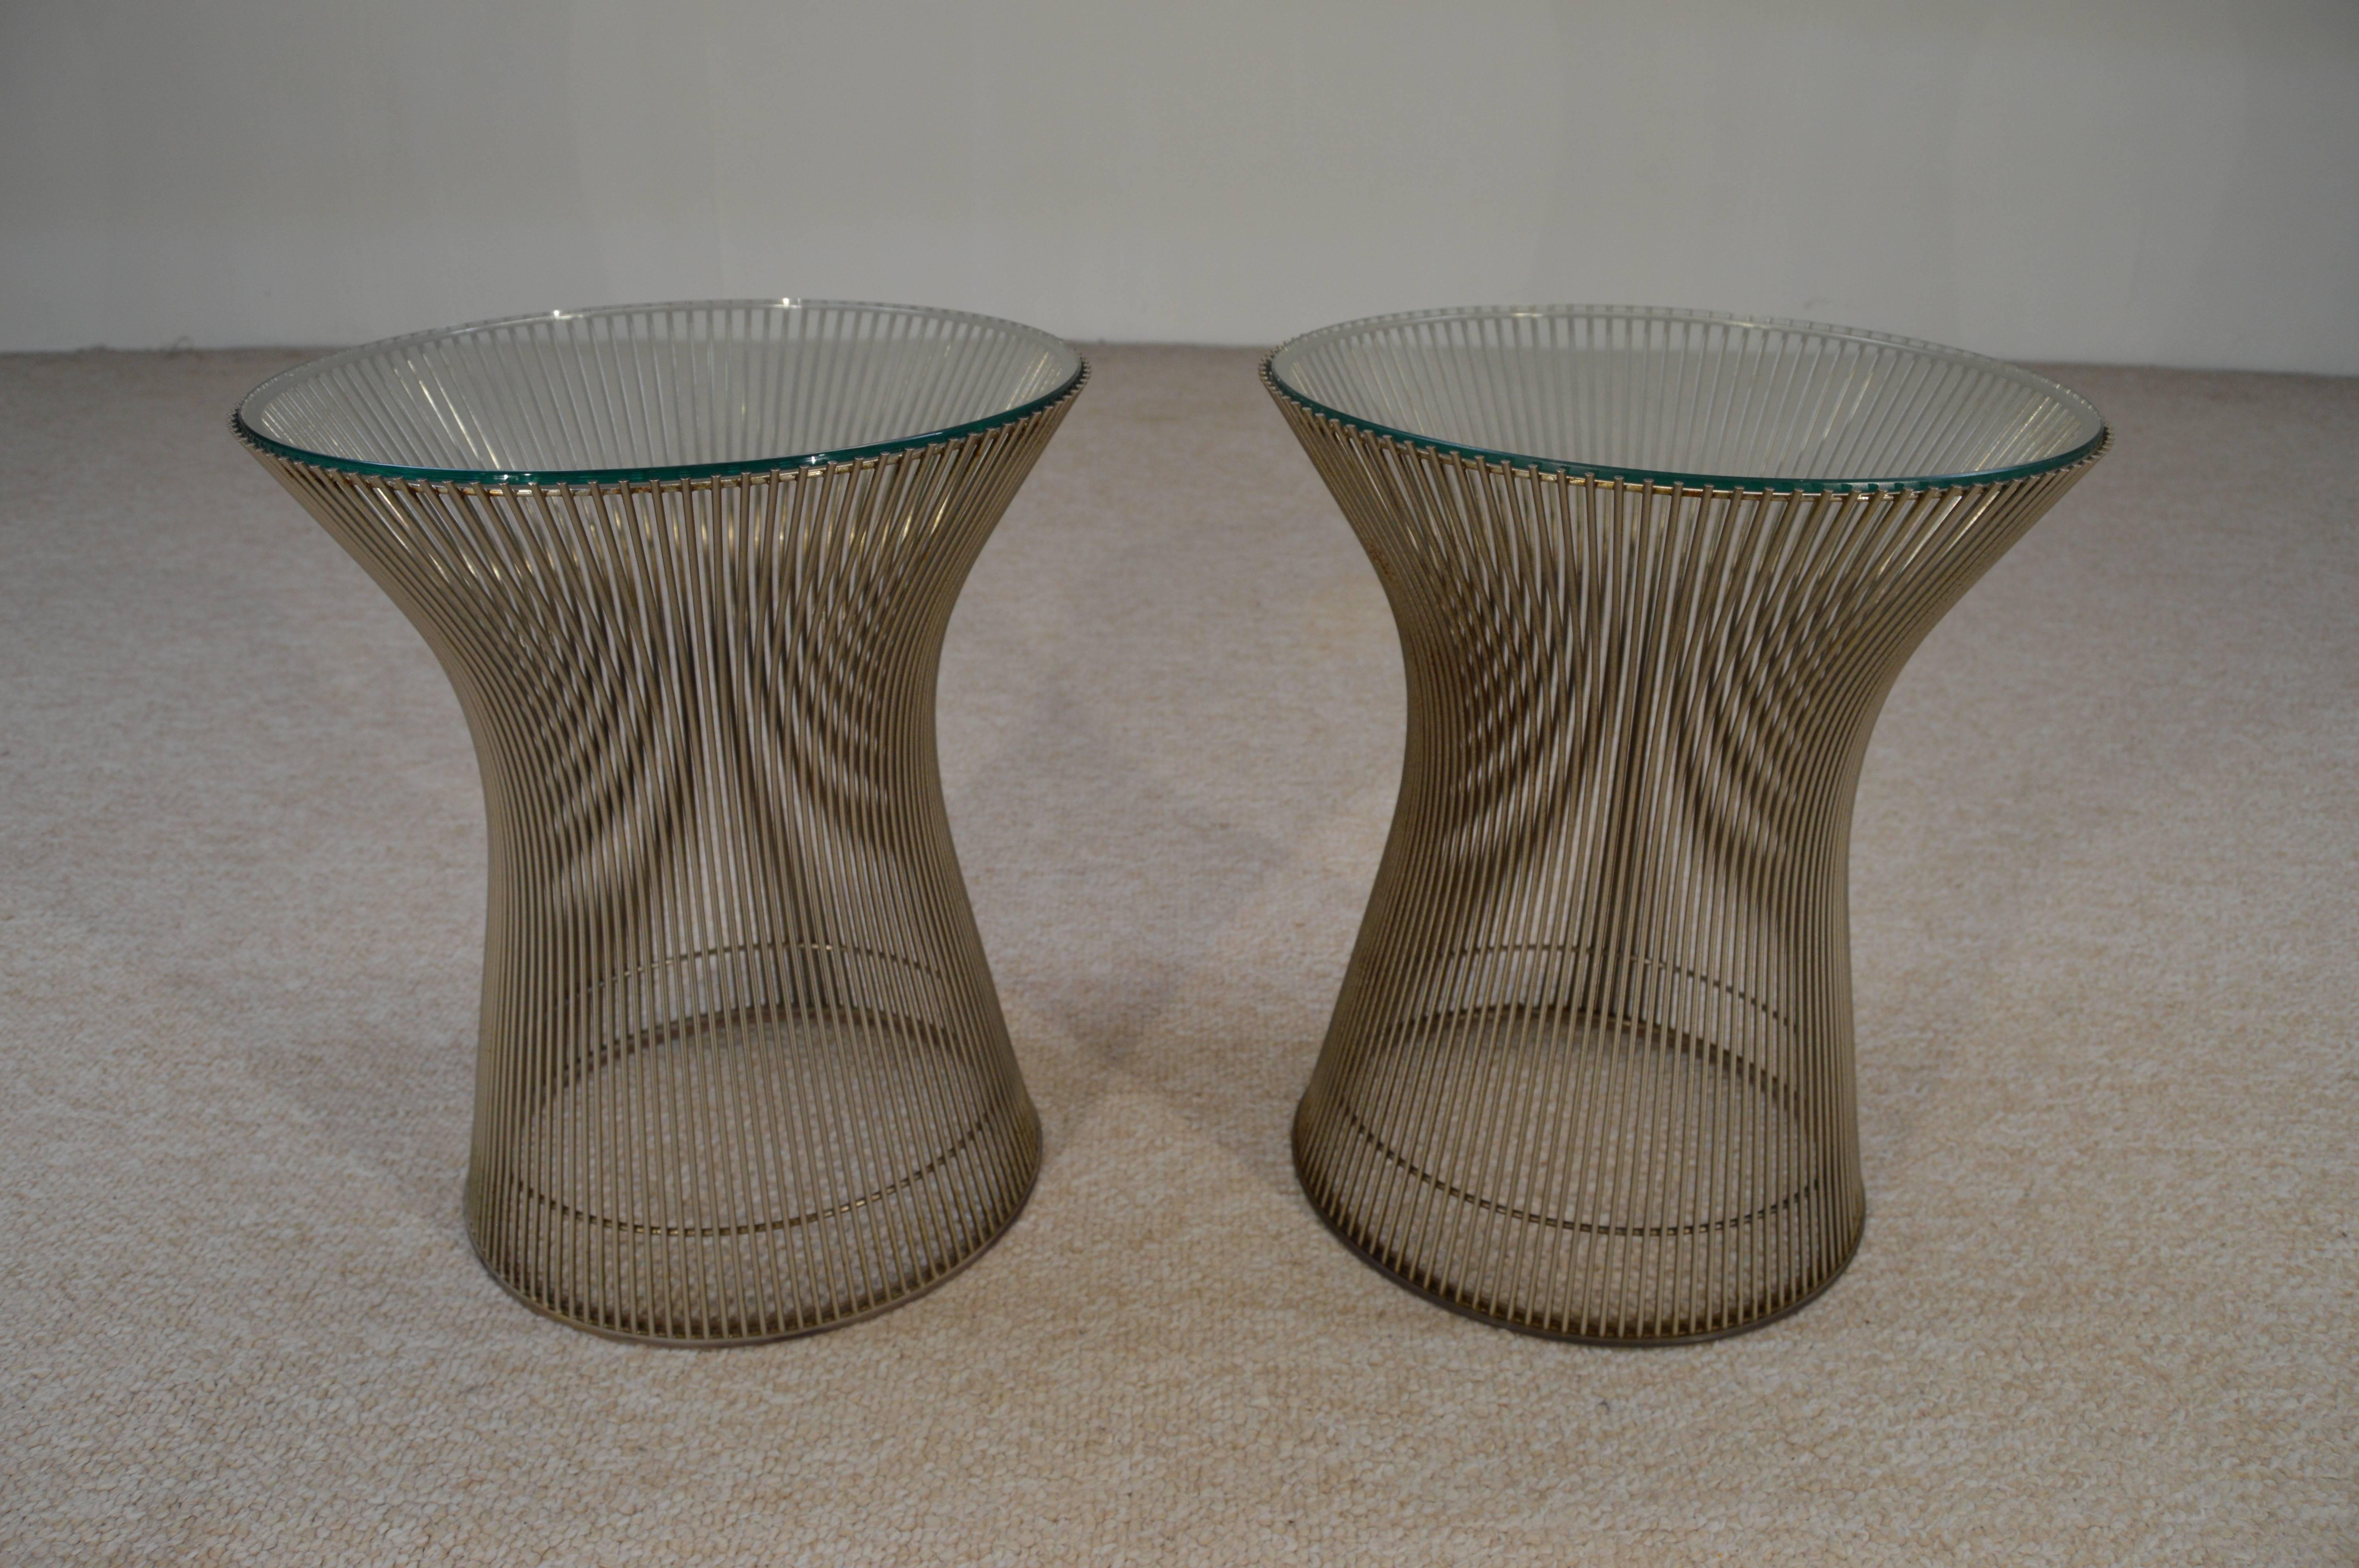 Early production pair of rare nickel glass top side tables designed by Warren Platner for Knoll. A Classic, beautiful design.
Original floor guards present. 

Measures: These are the larger 15 3/4" examples.